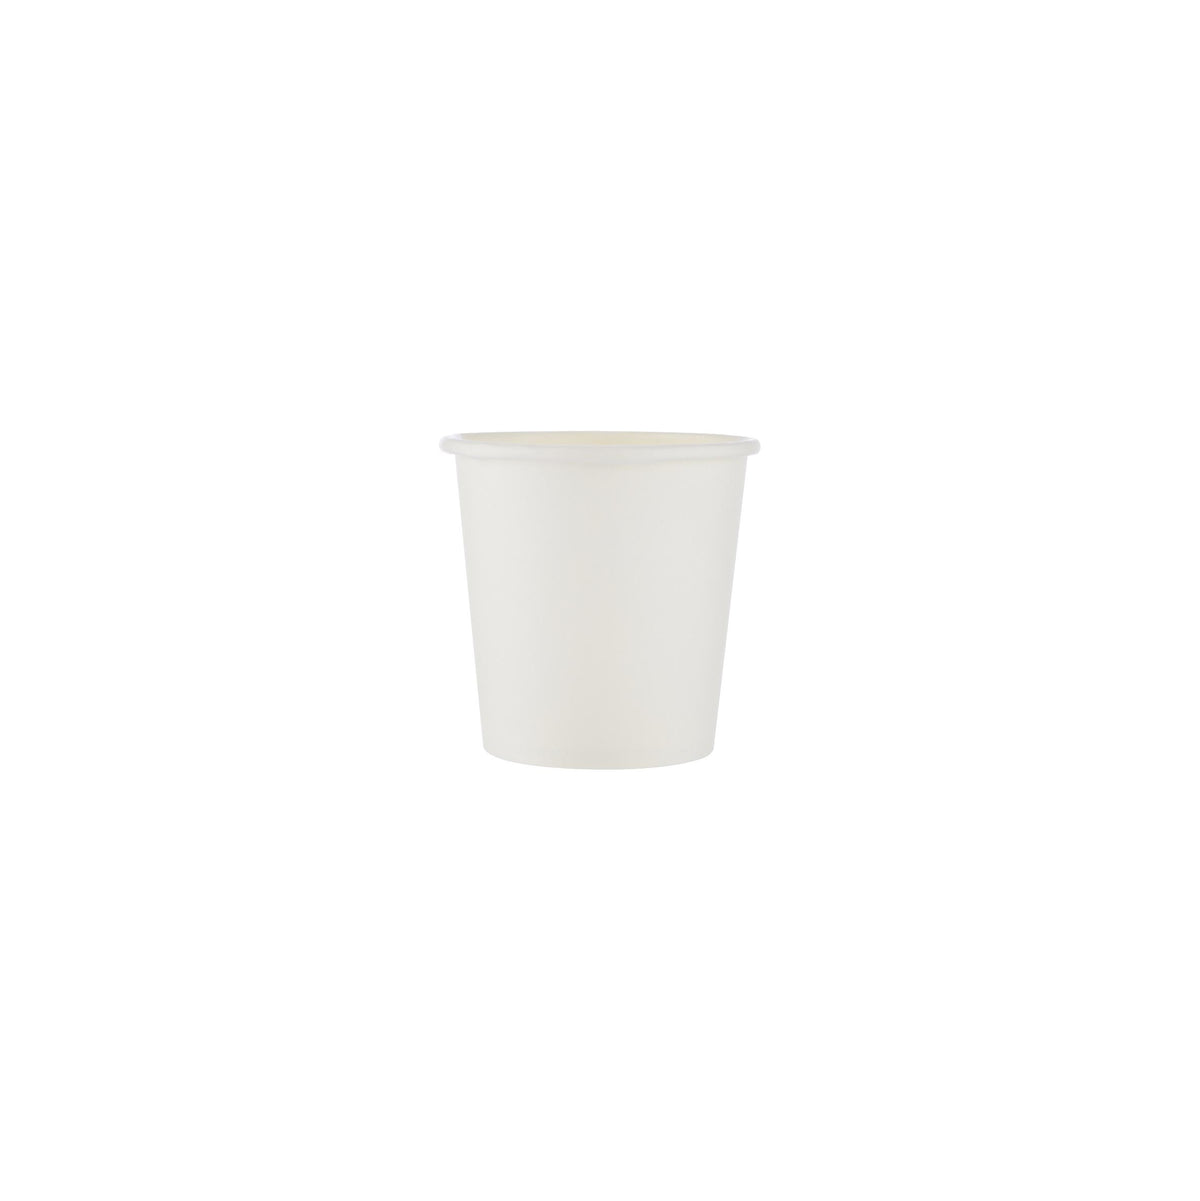 4 Oz White Single Wall Paper Cups - Hotpack Globa